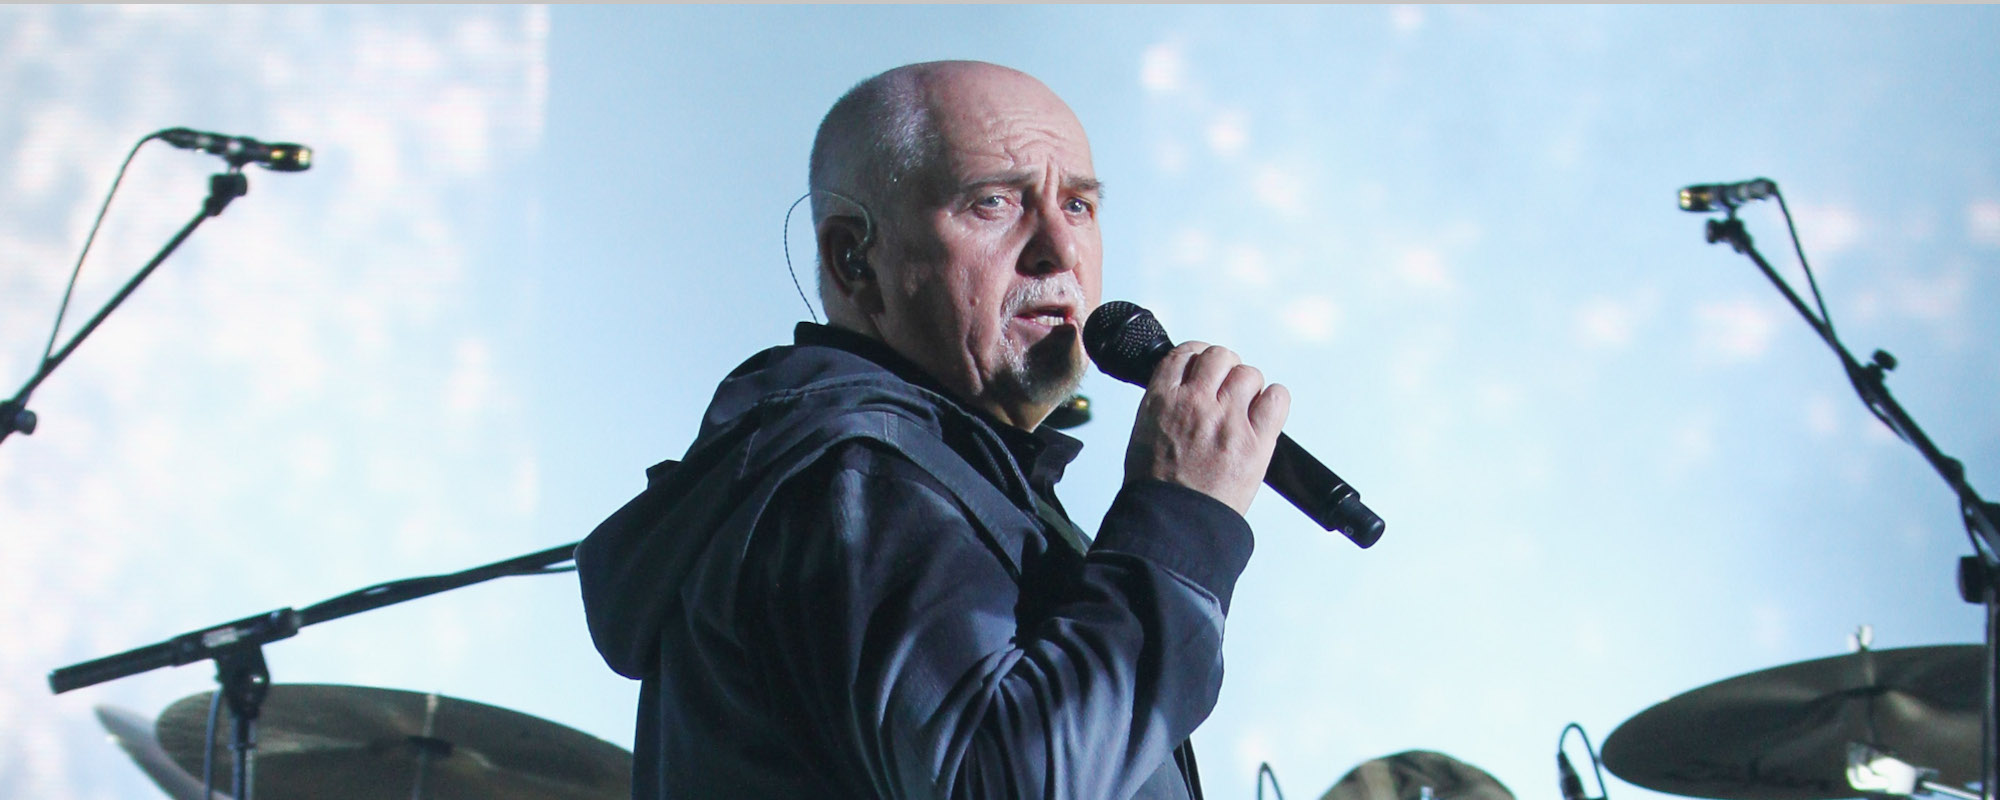 Behind the Meaning of “Solsbury Hill” by Peter Gabriel